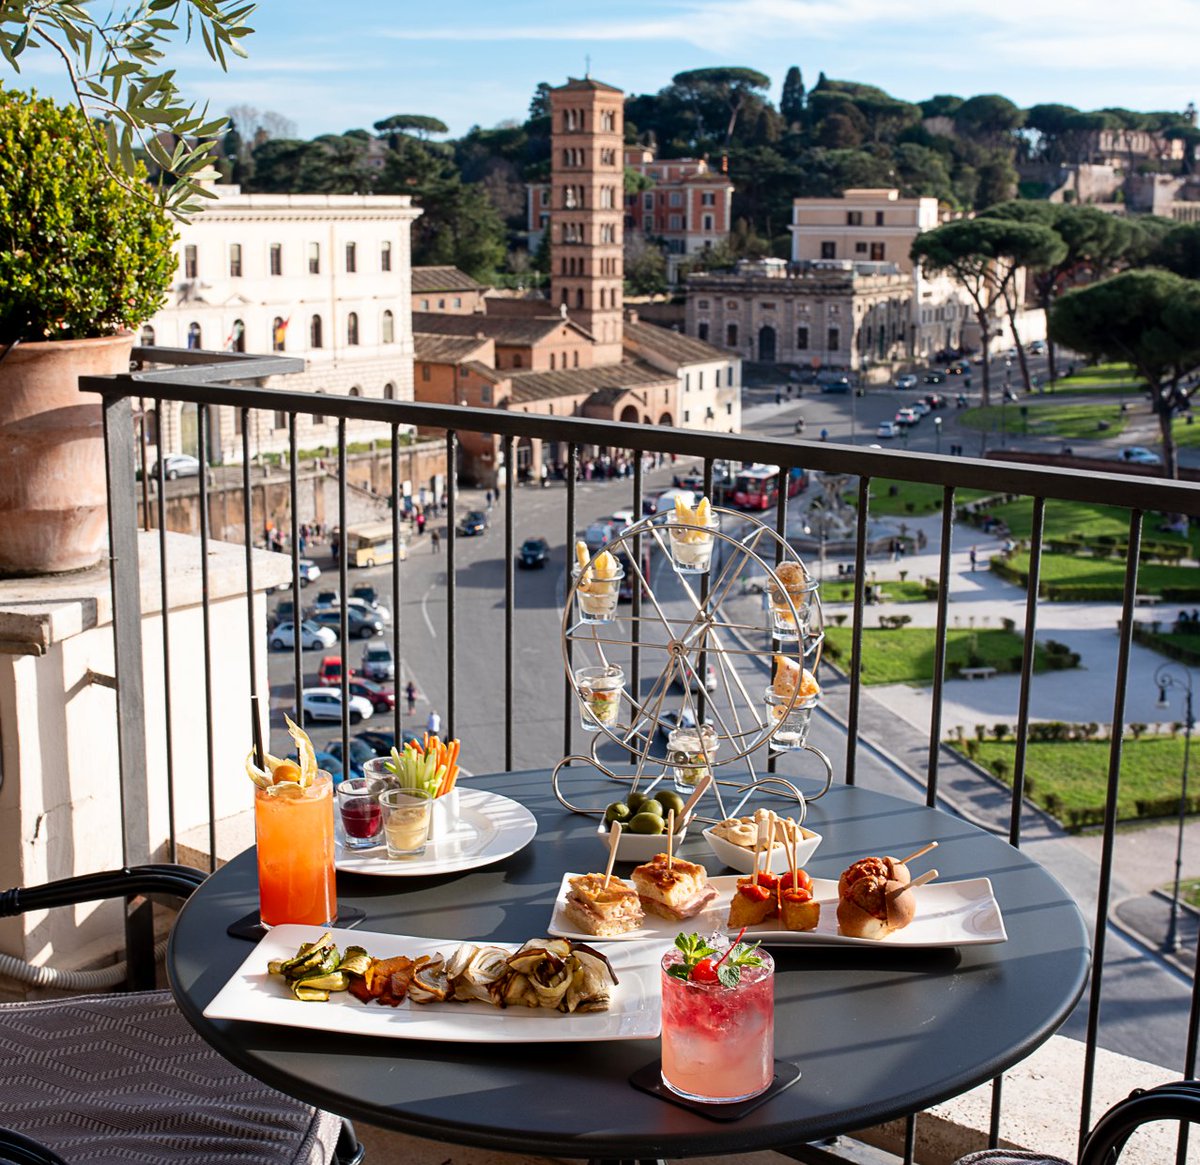 Sunny day means aperitif on the rooftop. ☀️🍹

#47boutiquehotel #rome